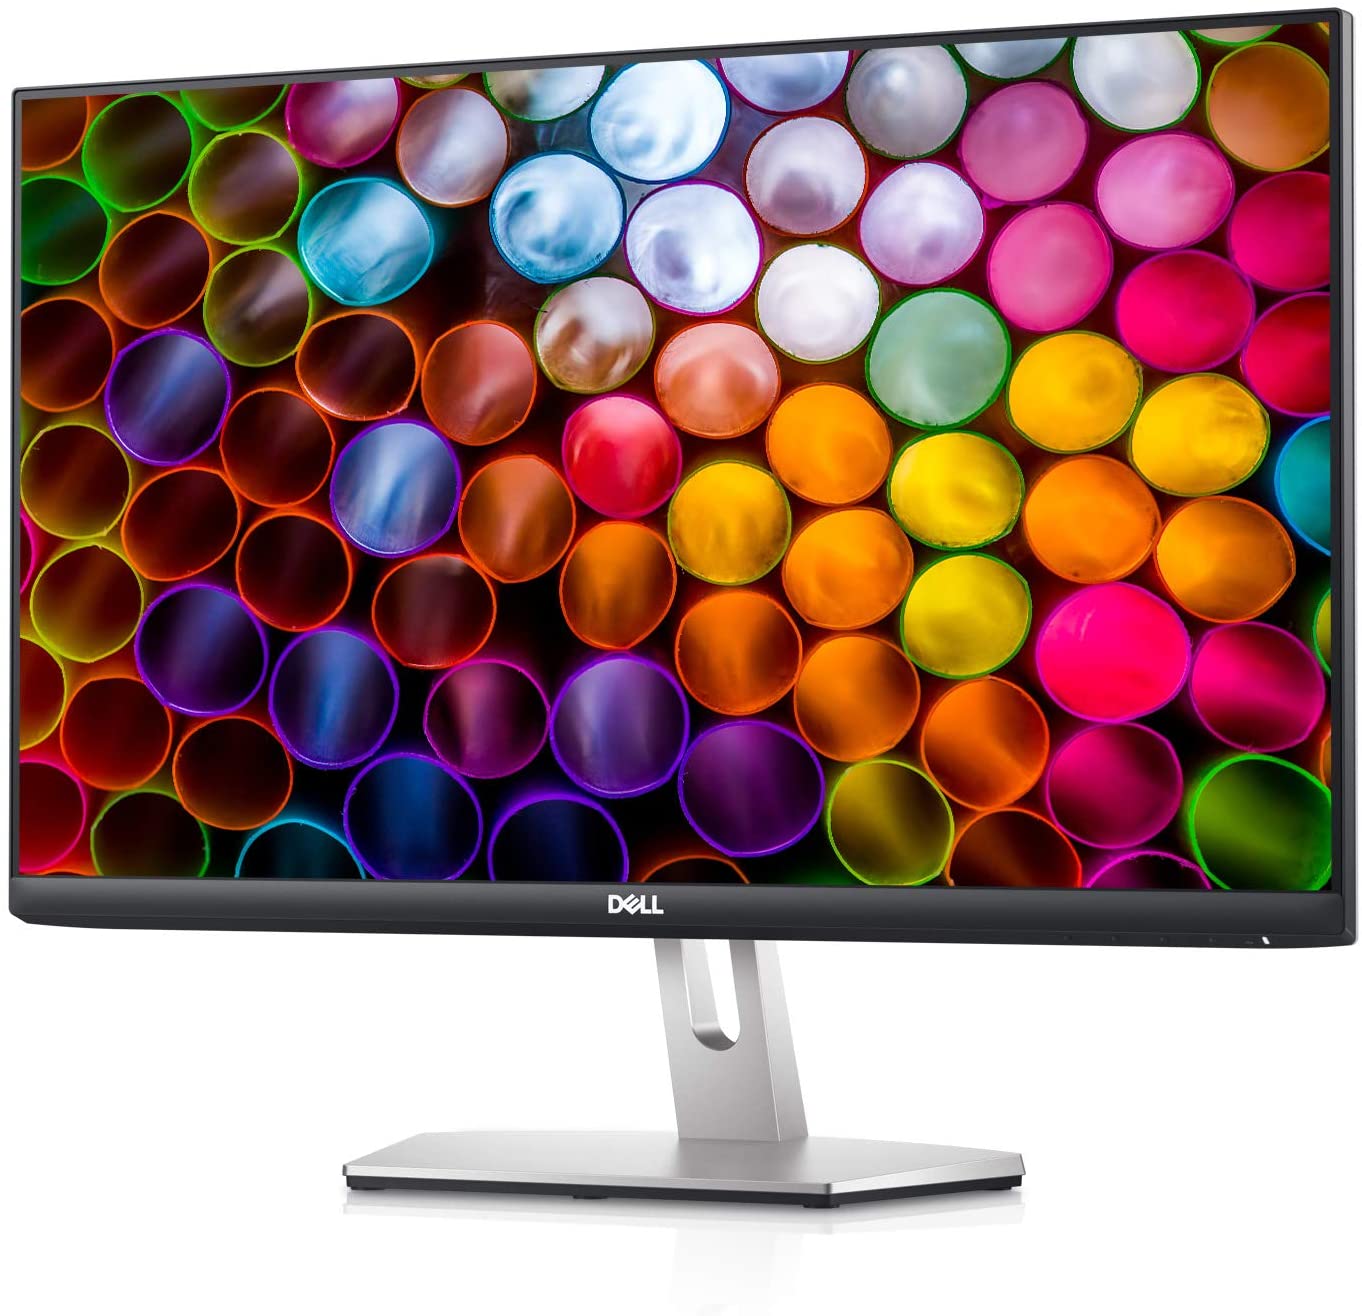 Dell 24 inch Monitor-S2421H IPS 1080p